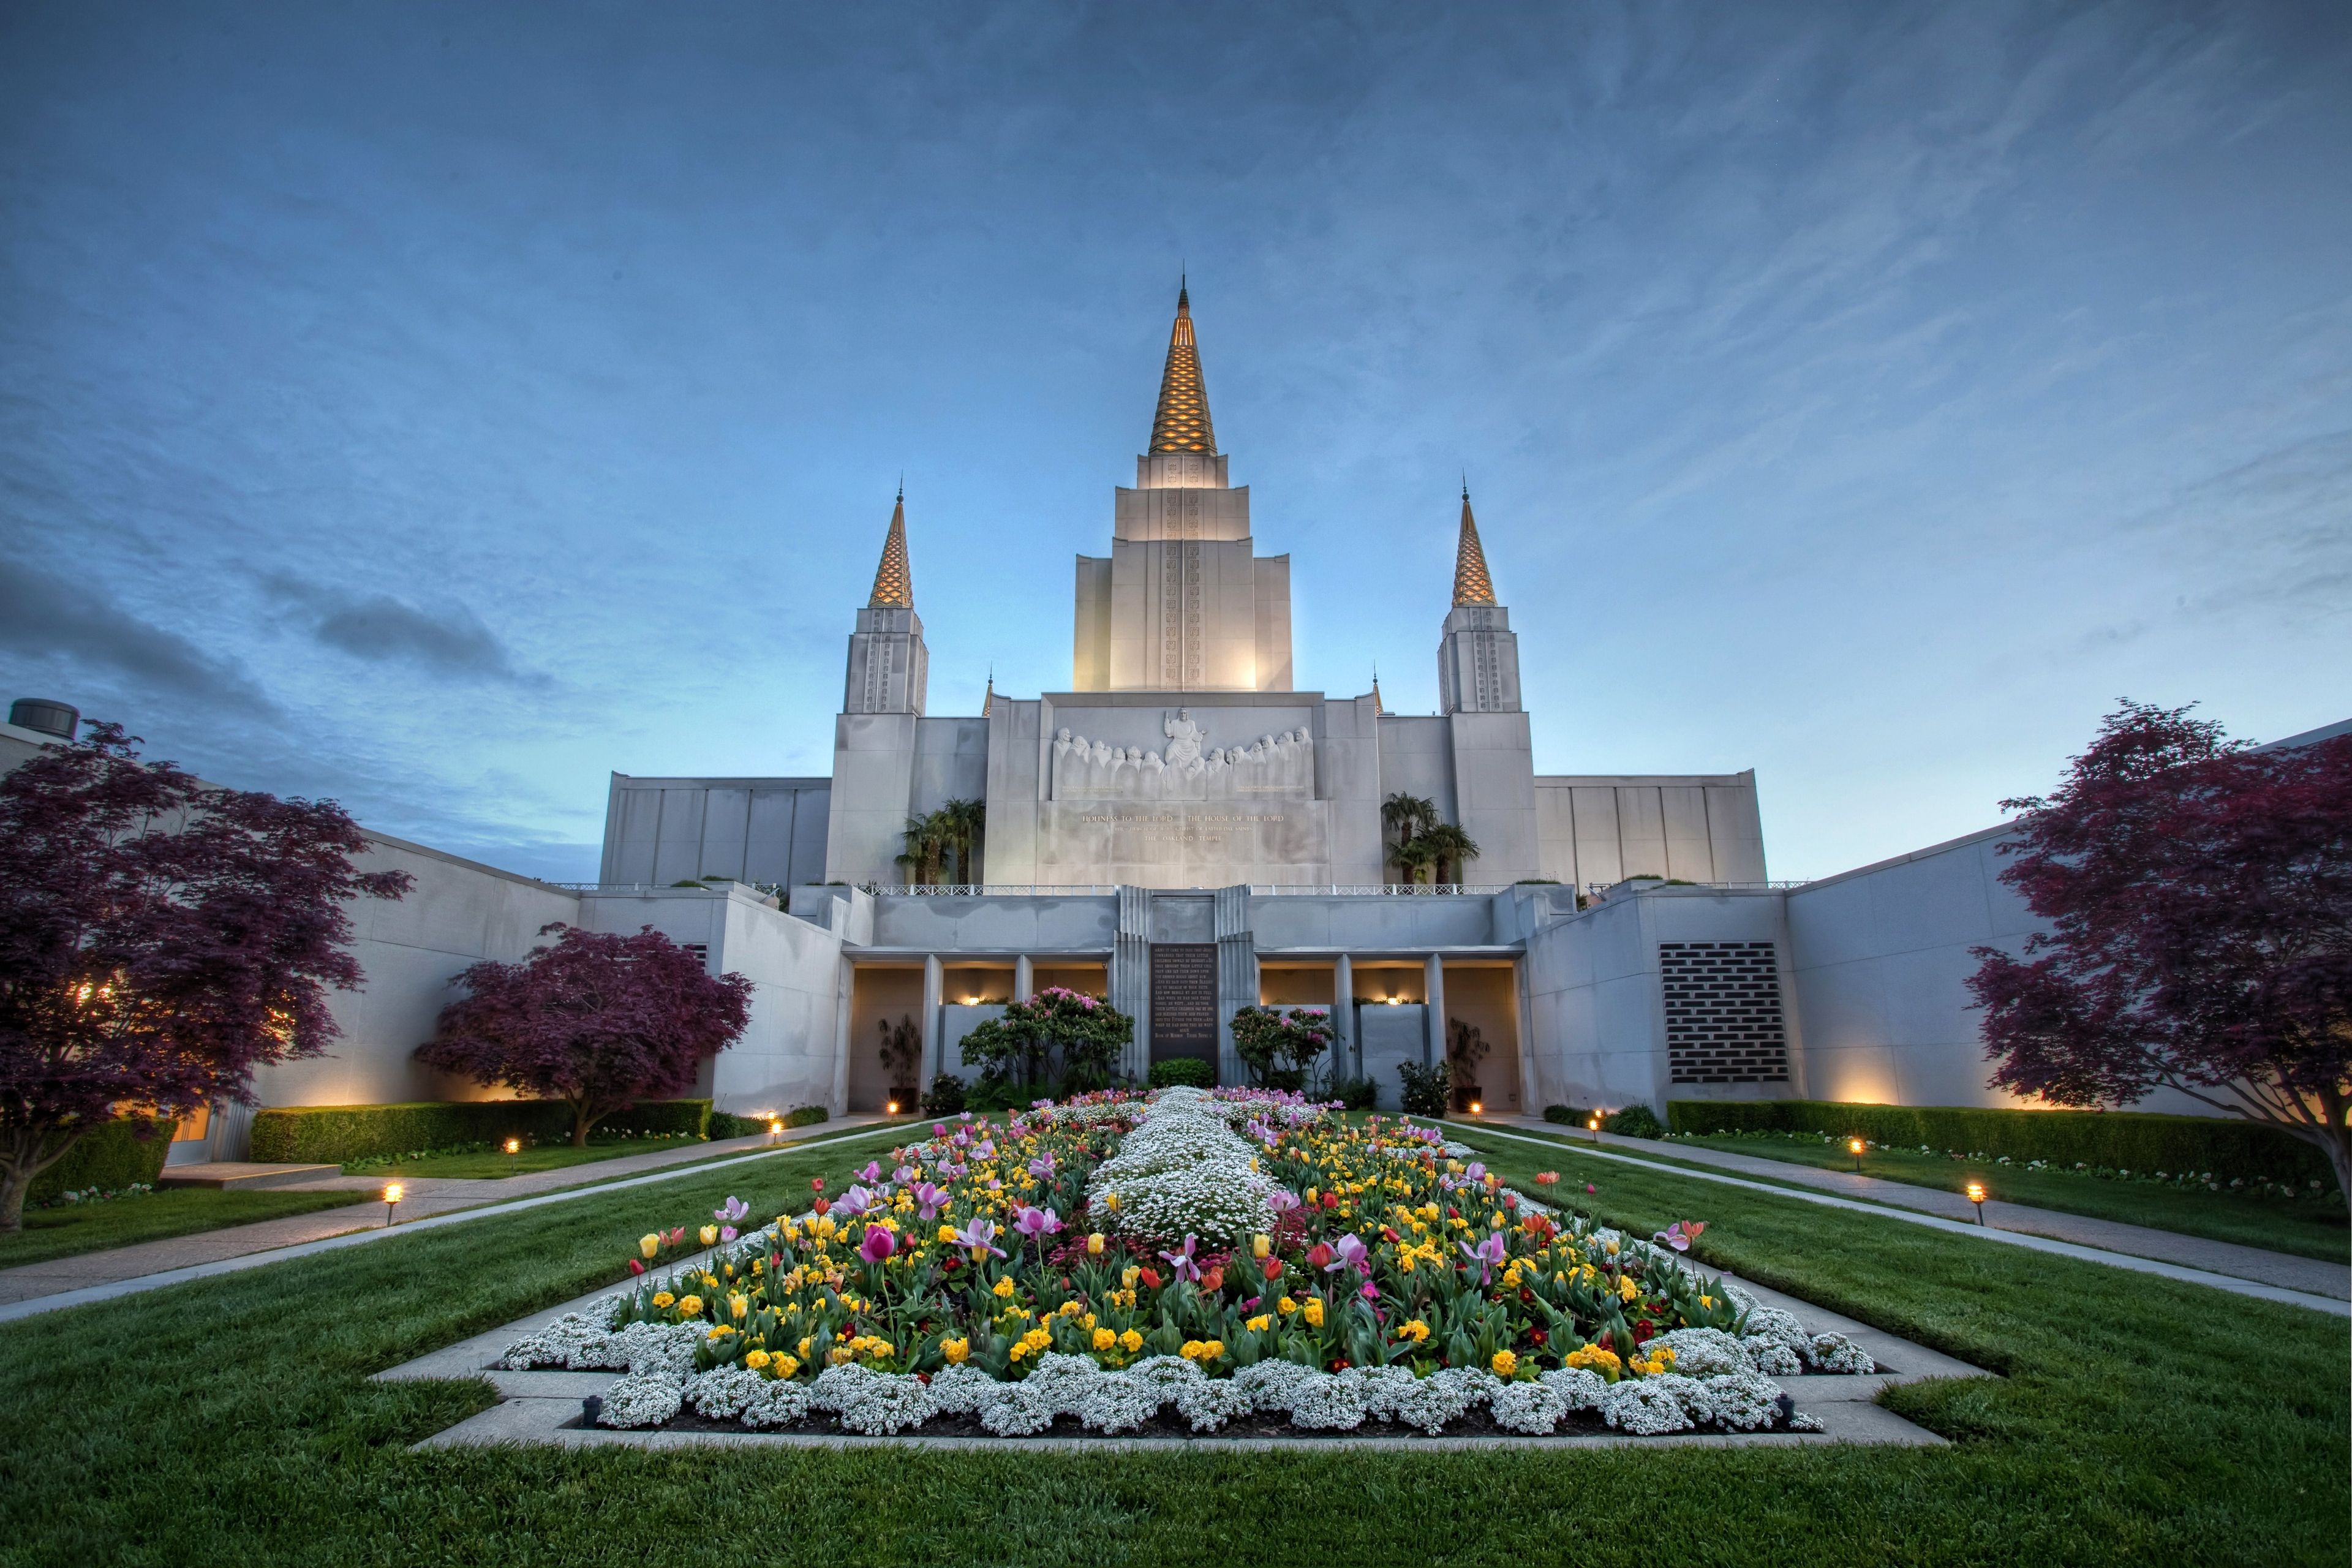 The Oakland California Temple, including the entrance and scenery.